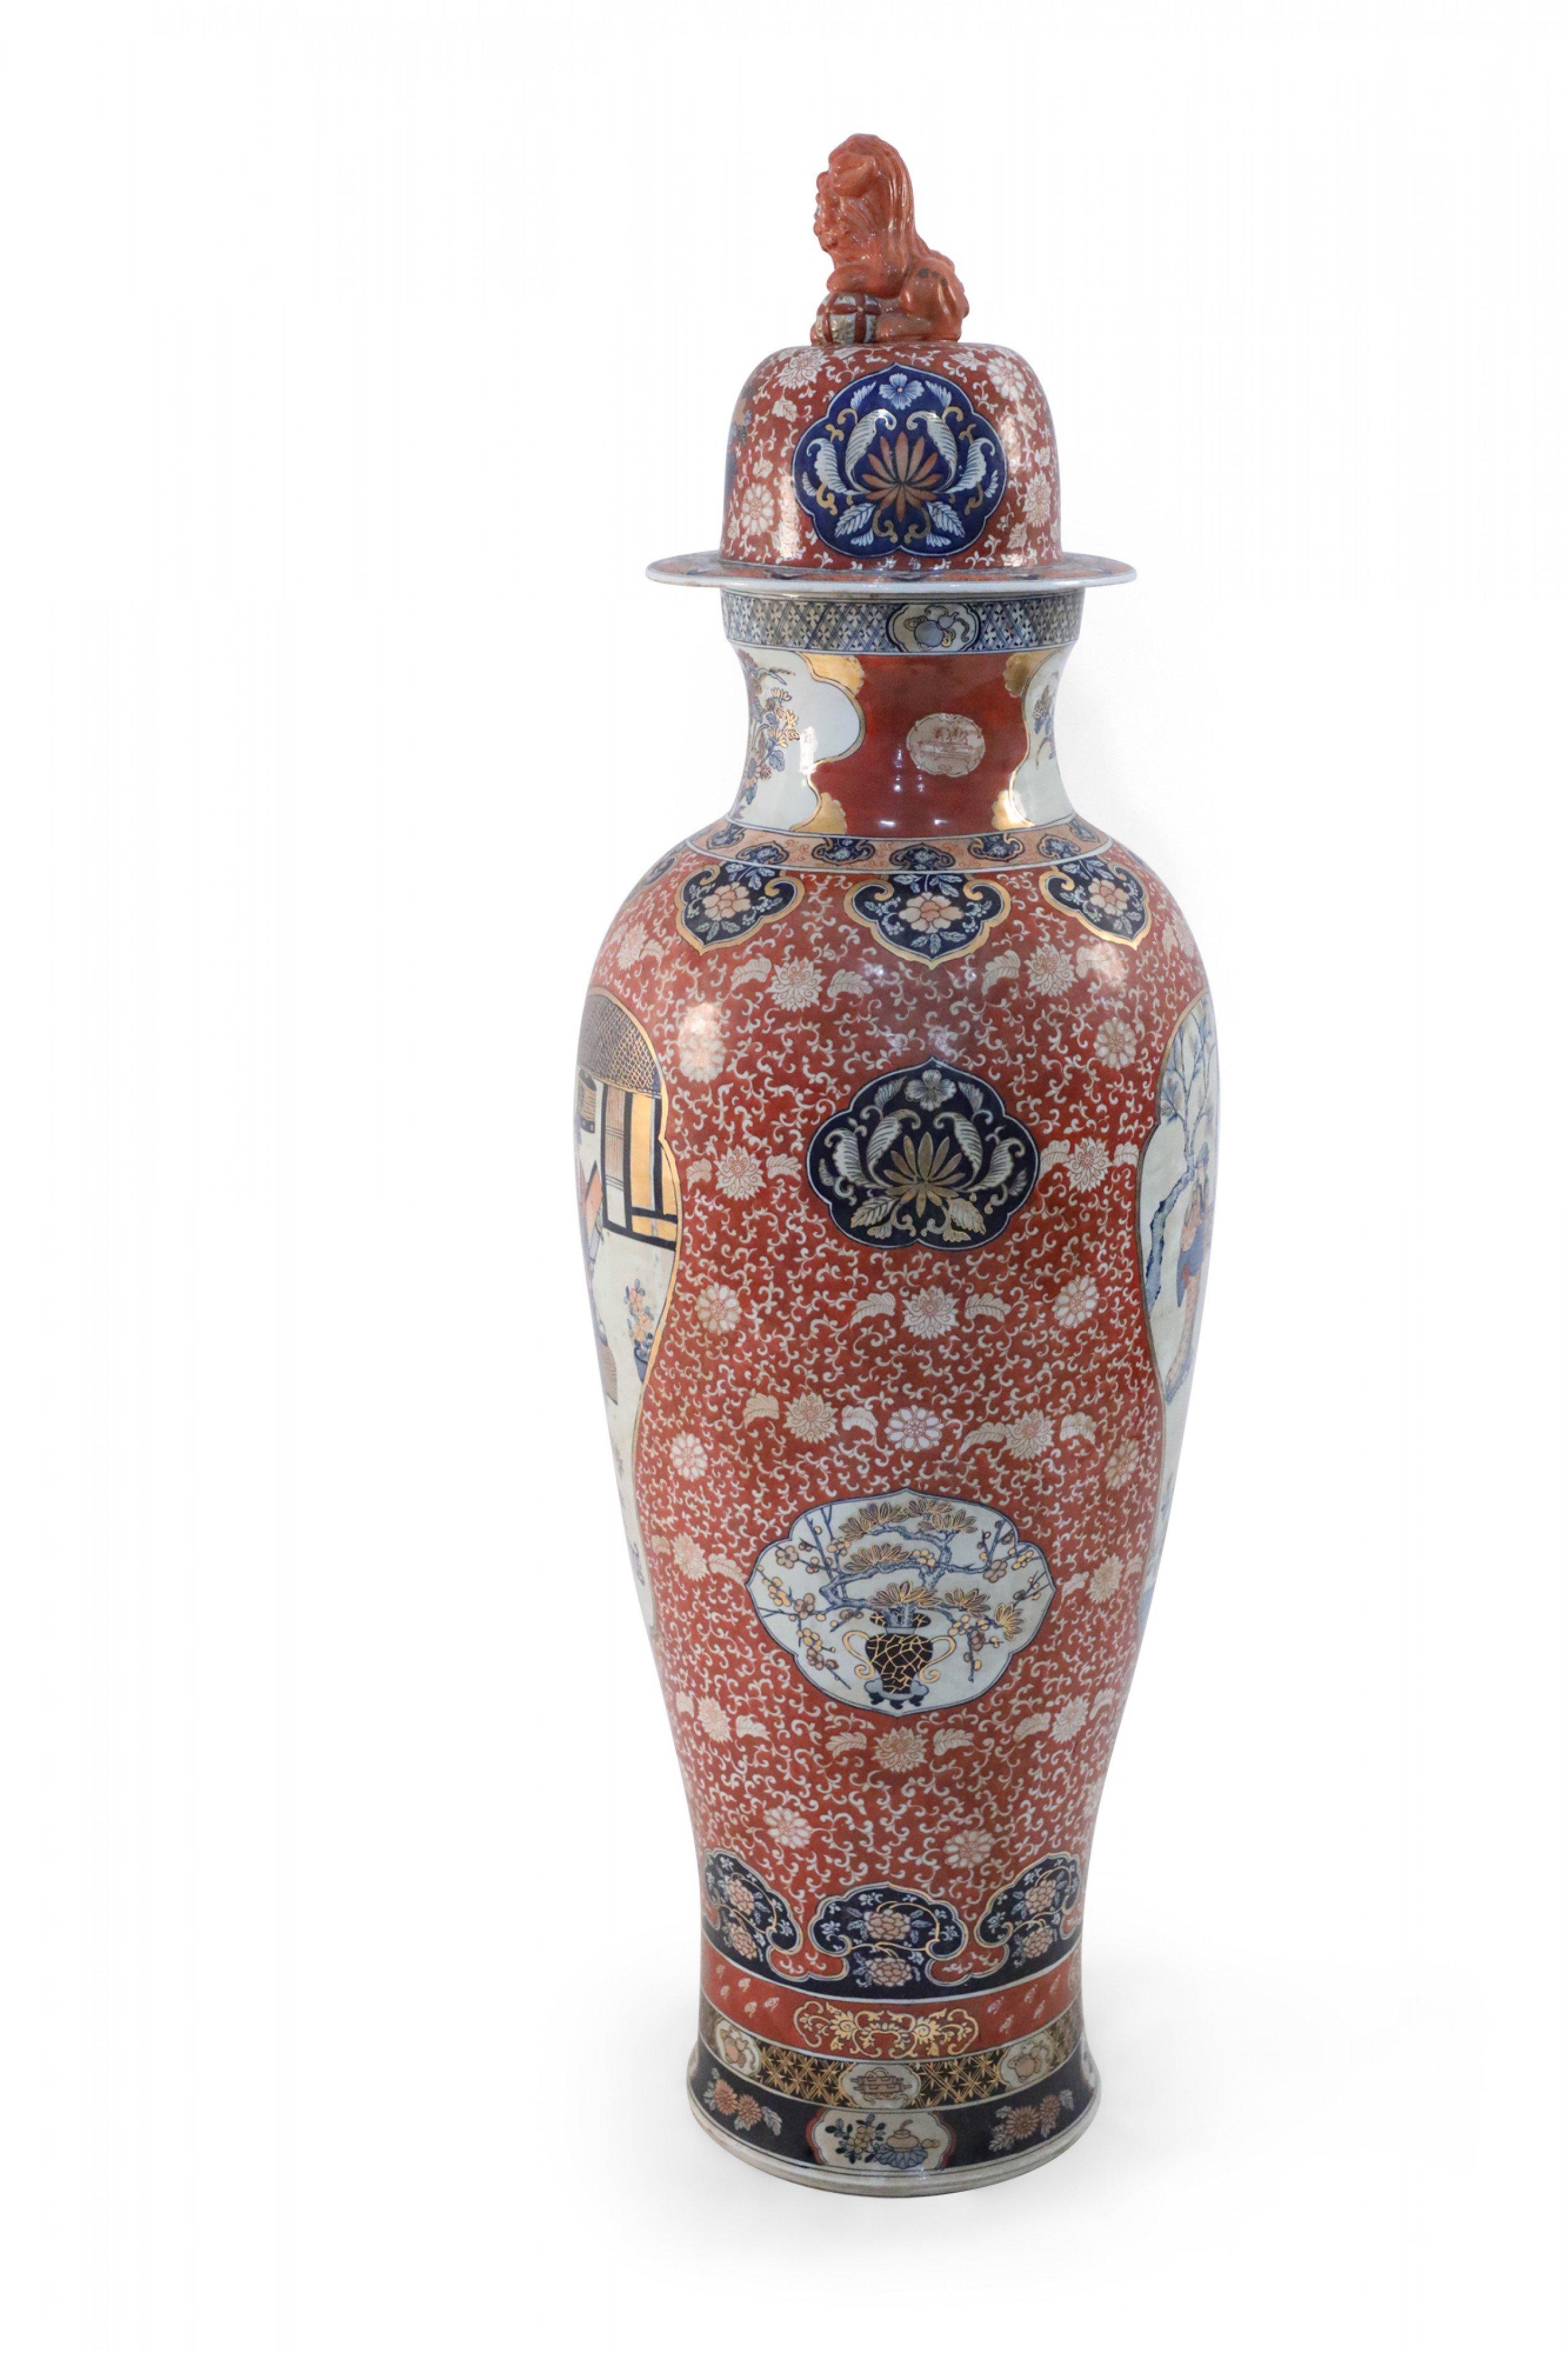 Chinese monumental lidded urn celebrating Japanese Imari ware in both palette and design, featuring medallions with figurative scenes against an orange, floral patterned ground and topped with a foo dog-finial lid.